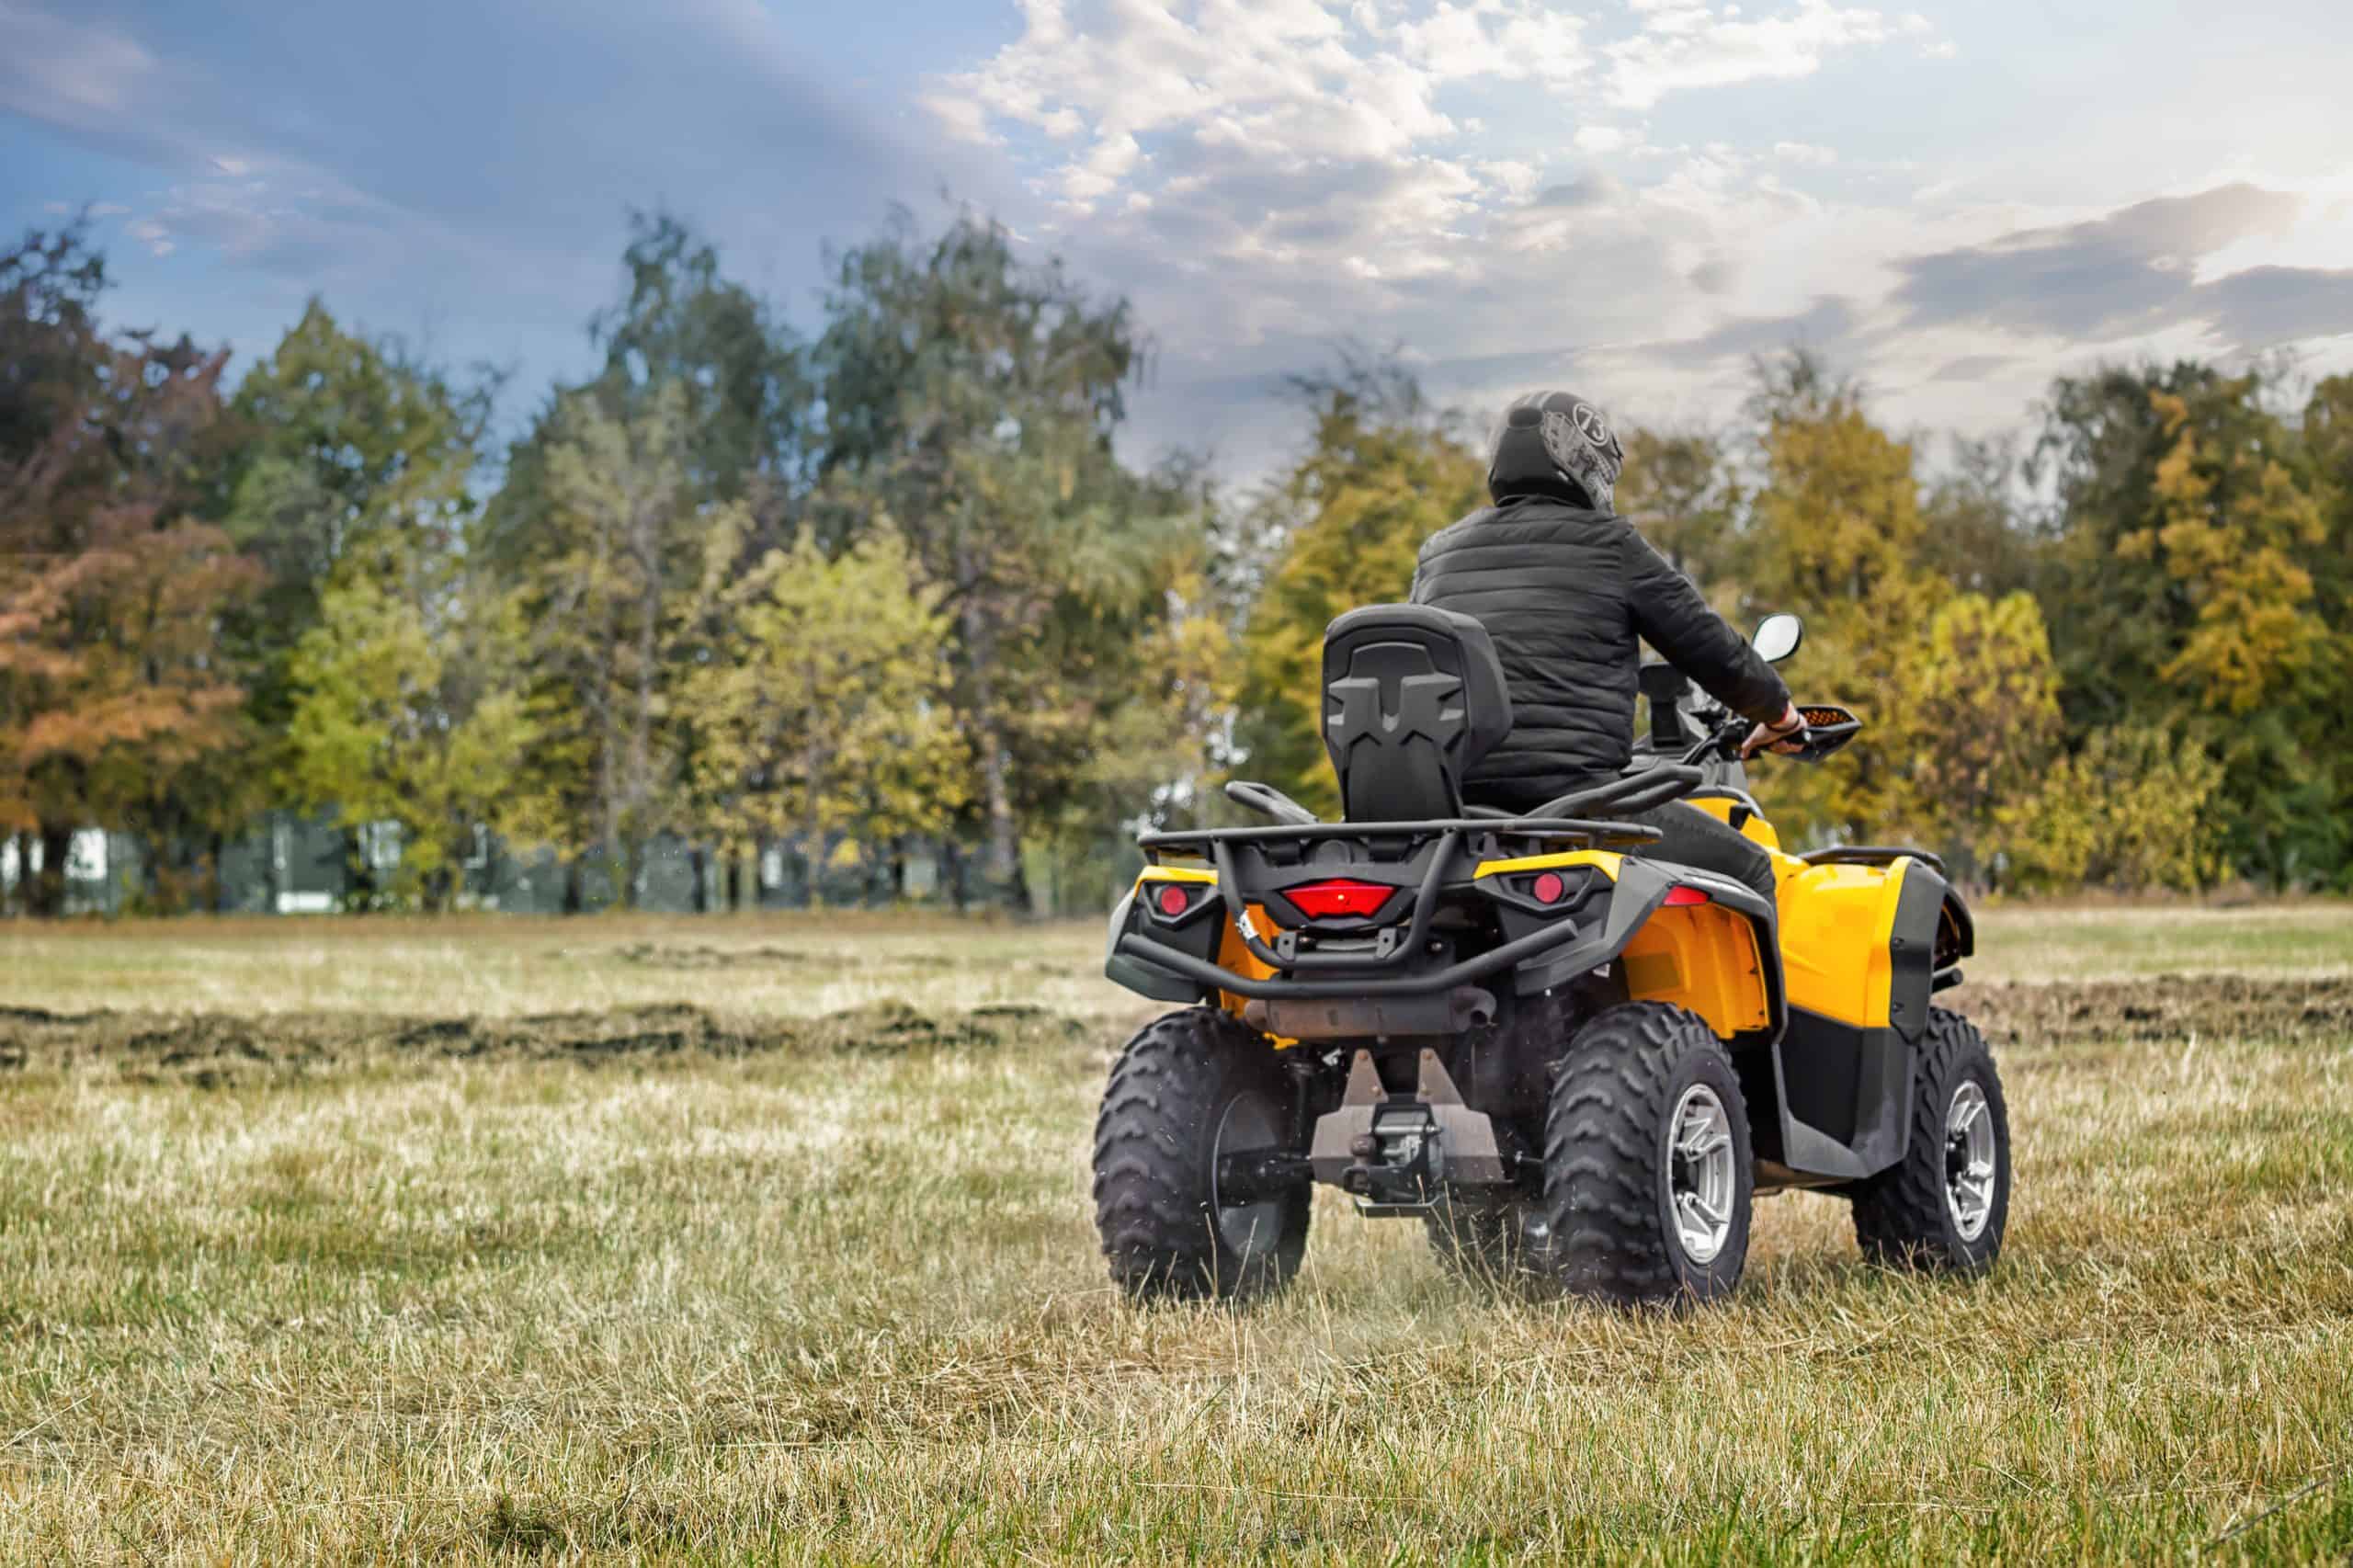 What Size ATV Do I Need to Buy for Off-Roading?